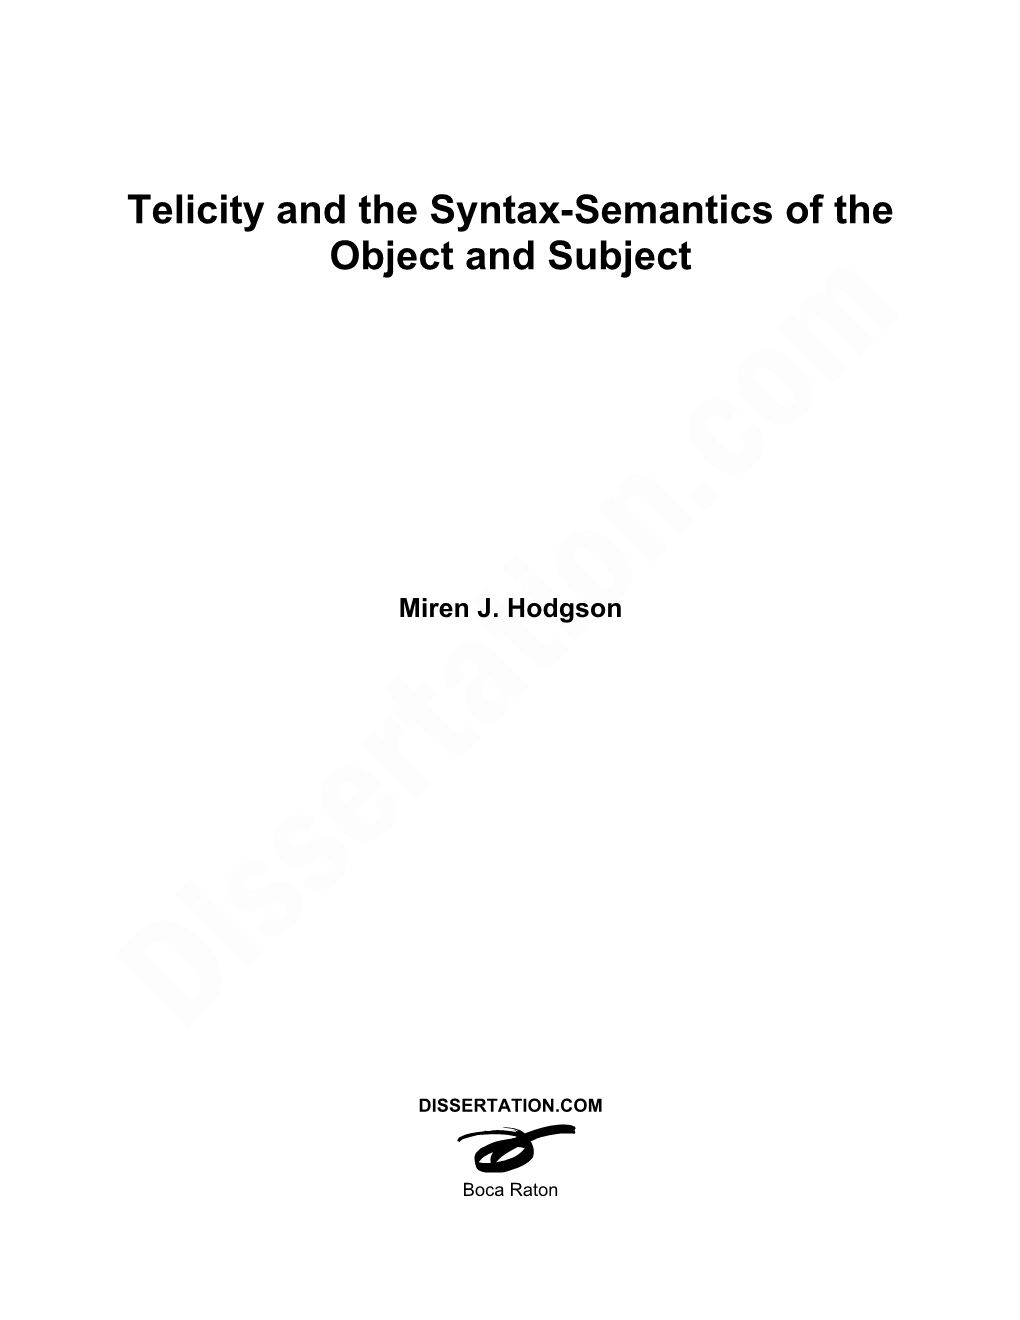 Telicity and the Syntax-Semantic of The